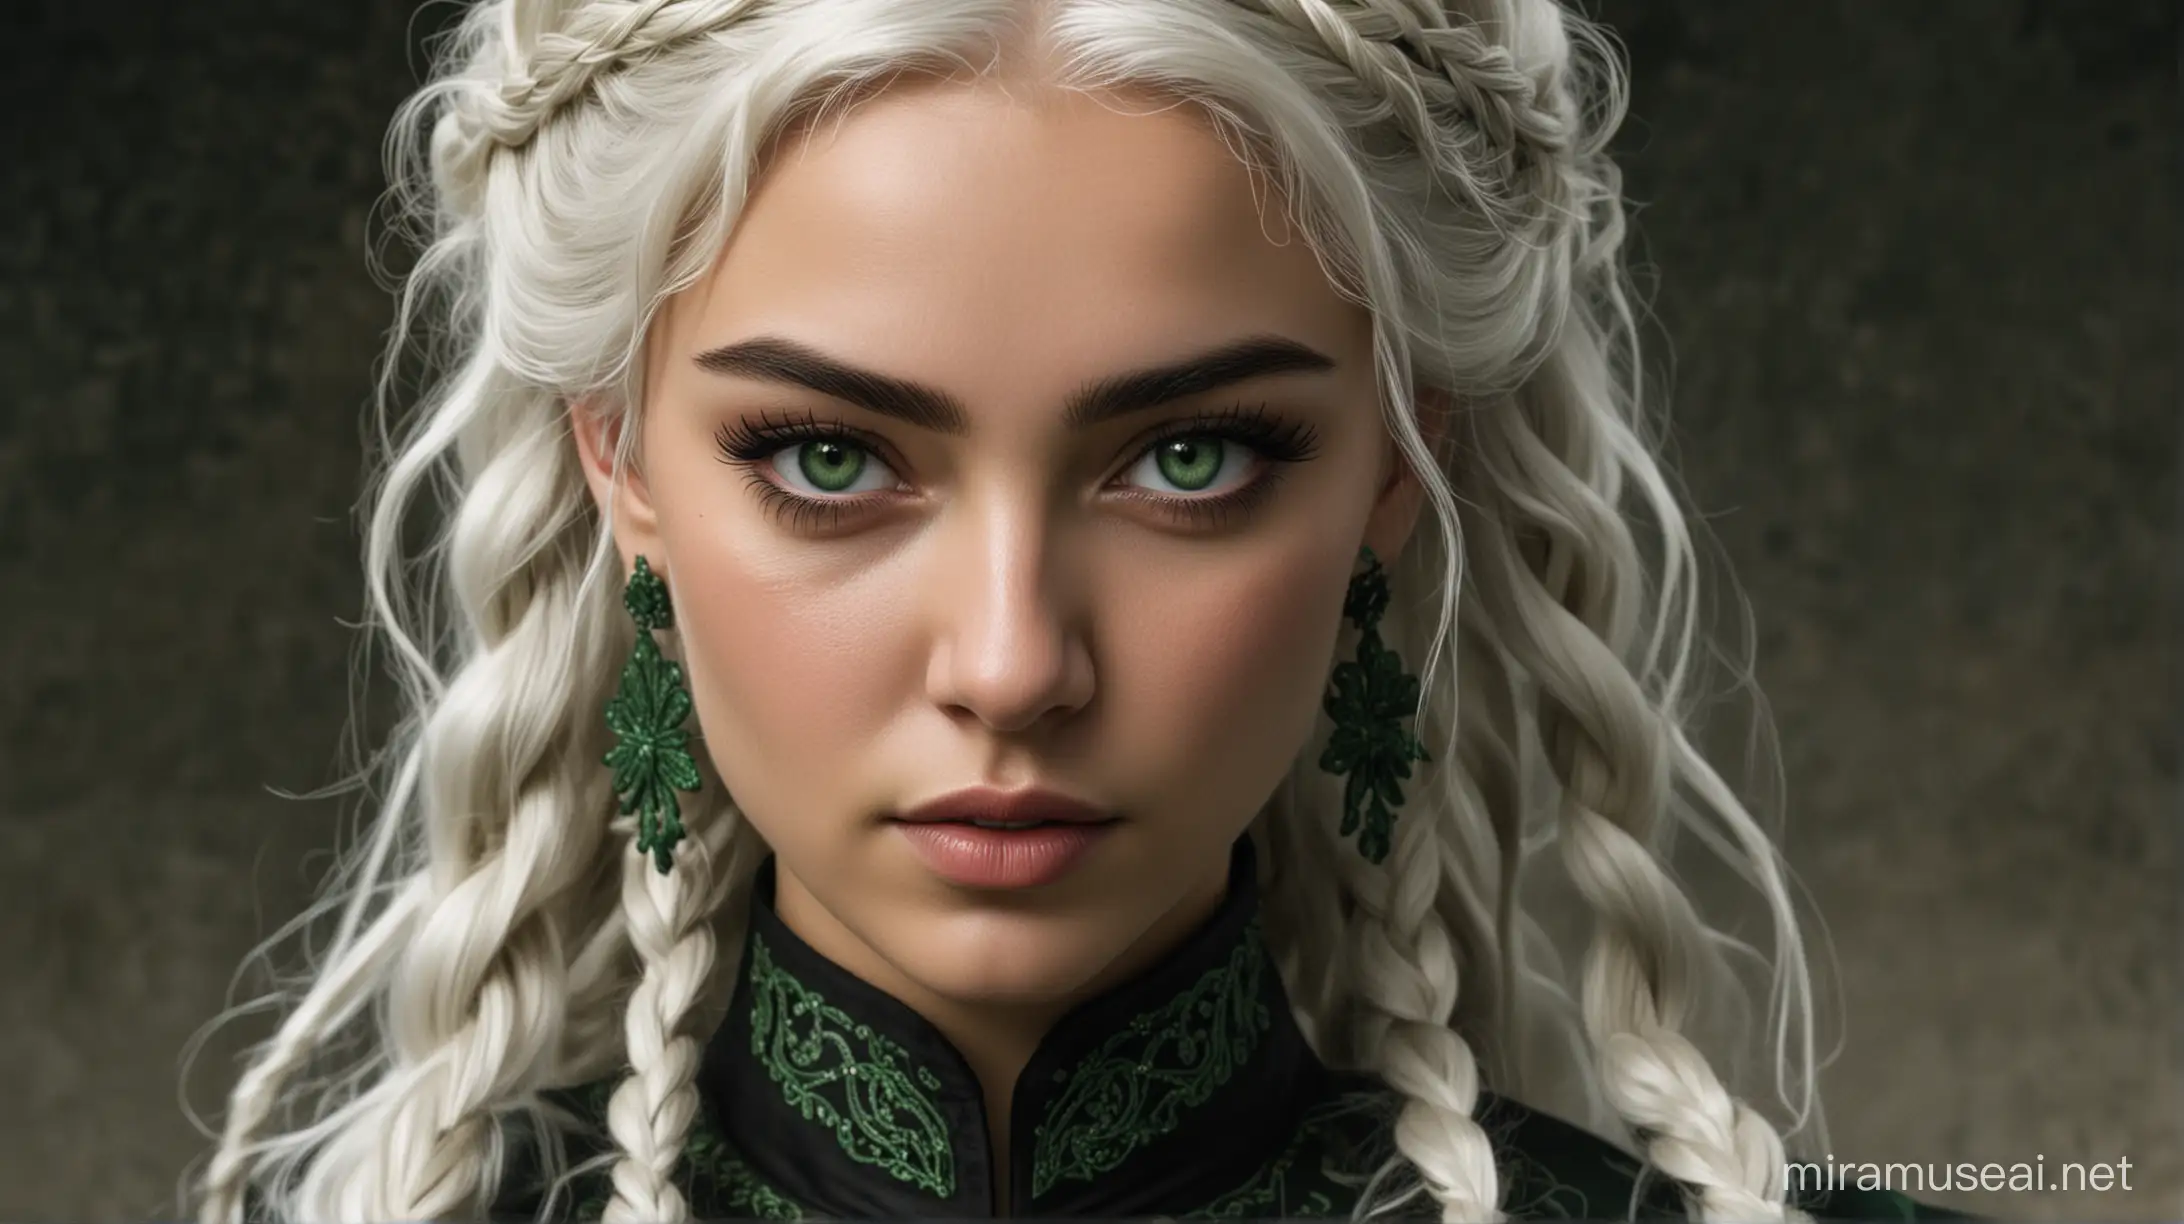 Determined Targaryen Princess with Emerald Eyes in Black and Green Attire